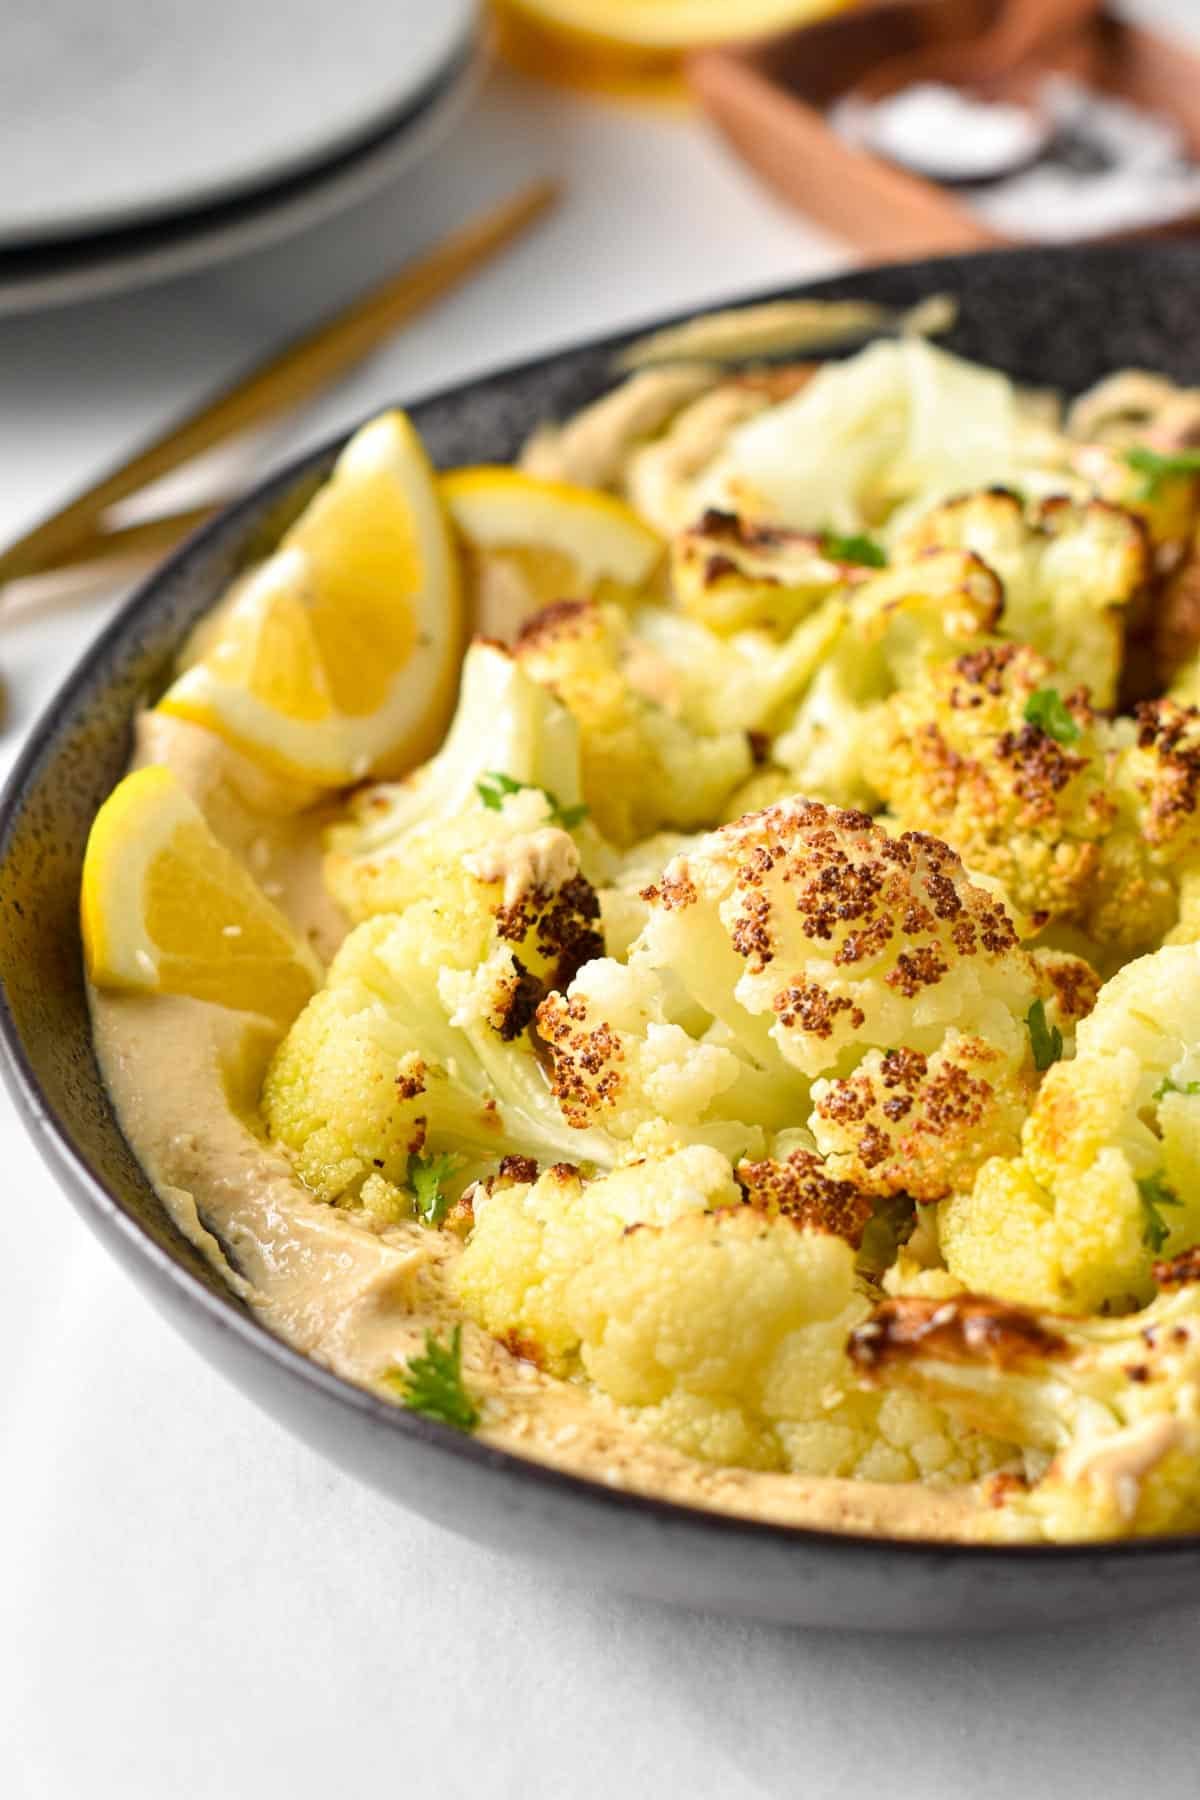 A dish of roasted cauliflower florets on top of a creamy tahini sauce with lemon wedges.